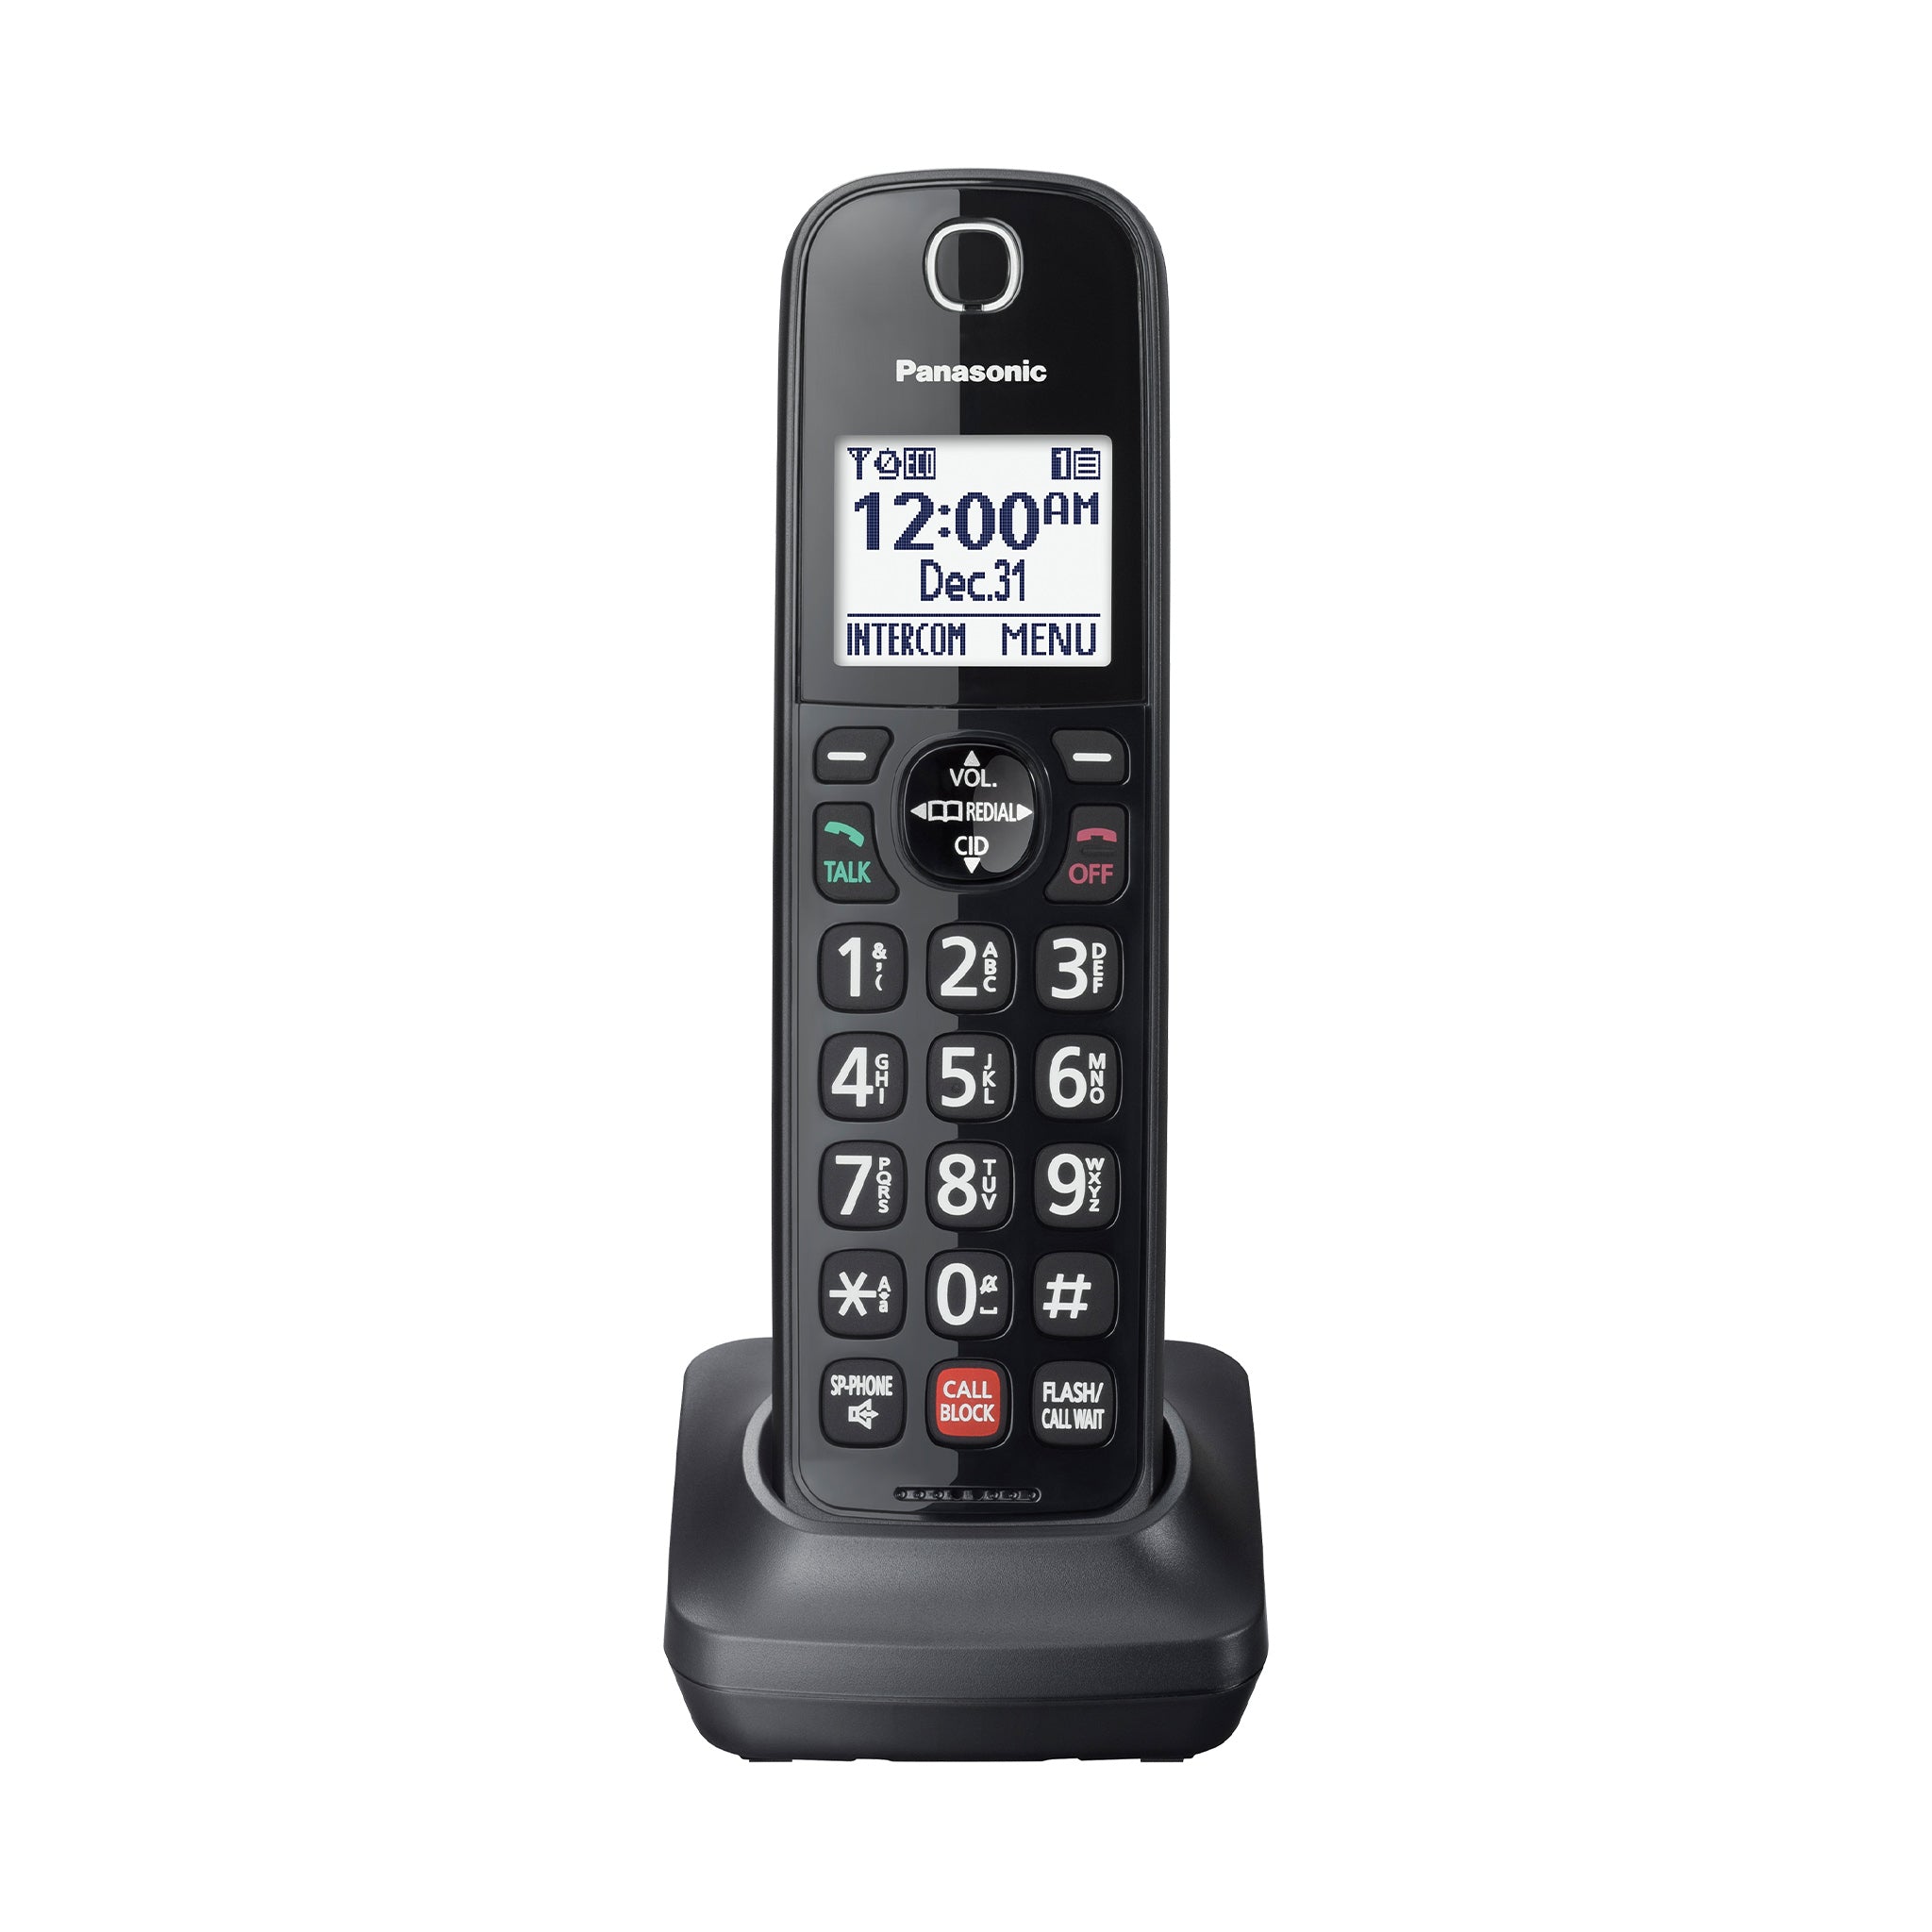 Cordless Phone Accessory Handset for TGF85x Series